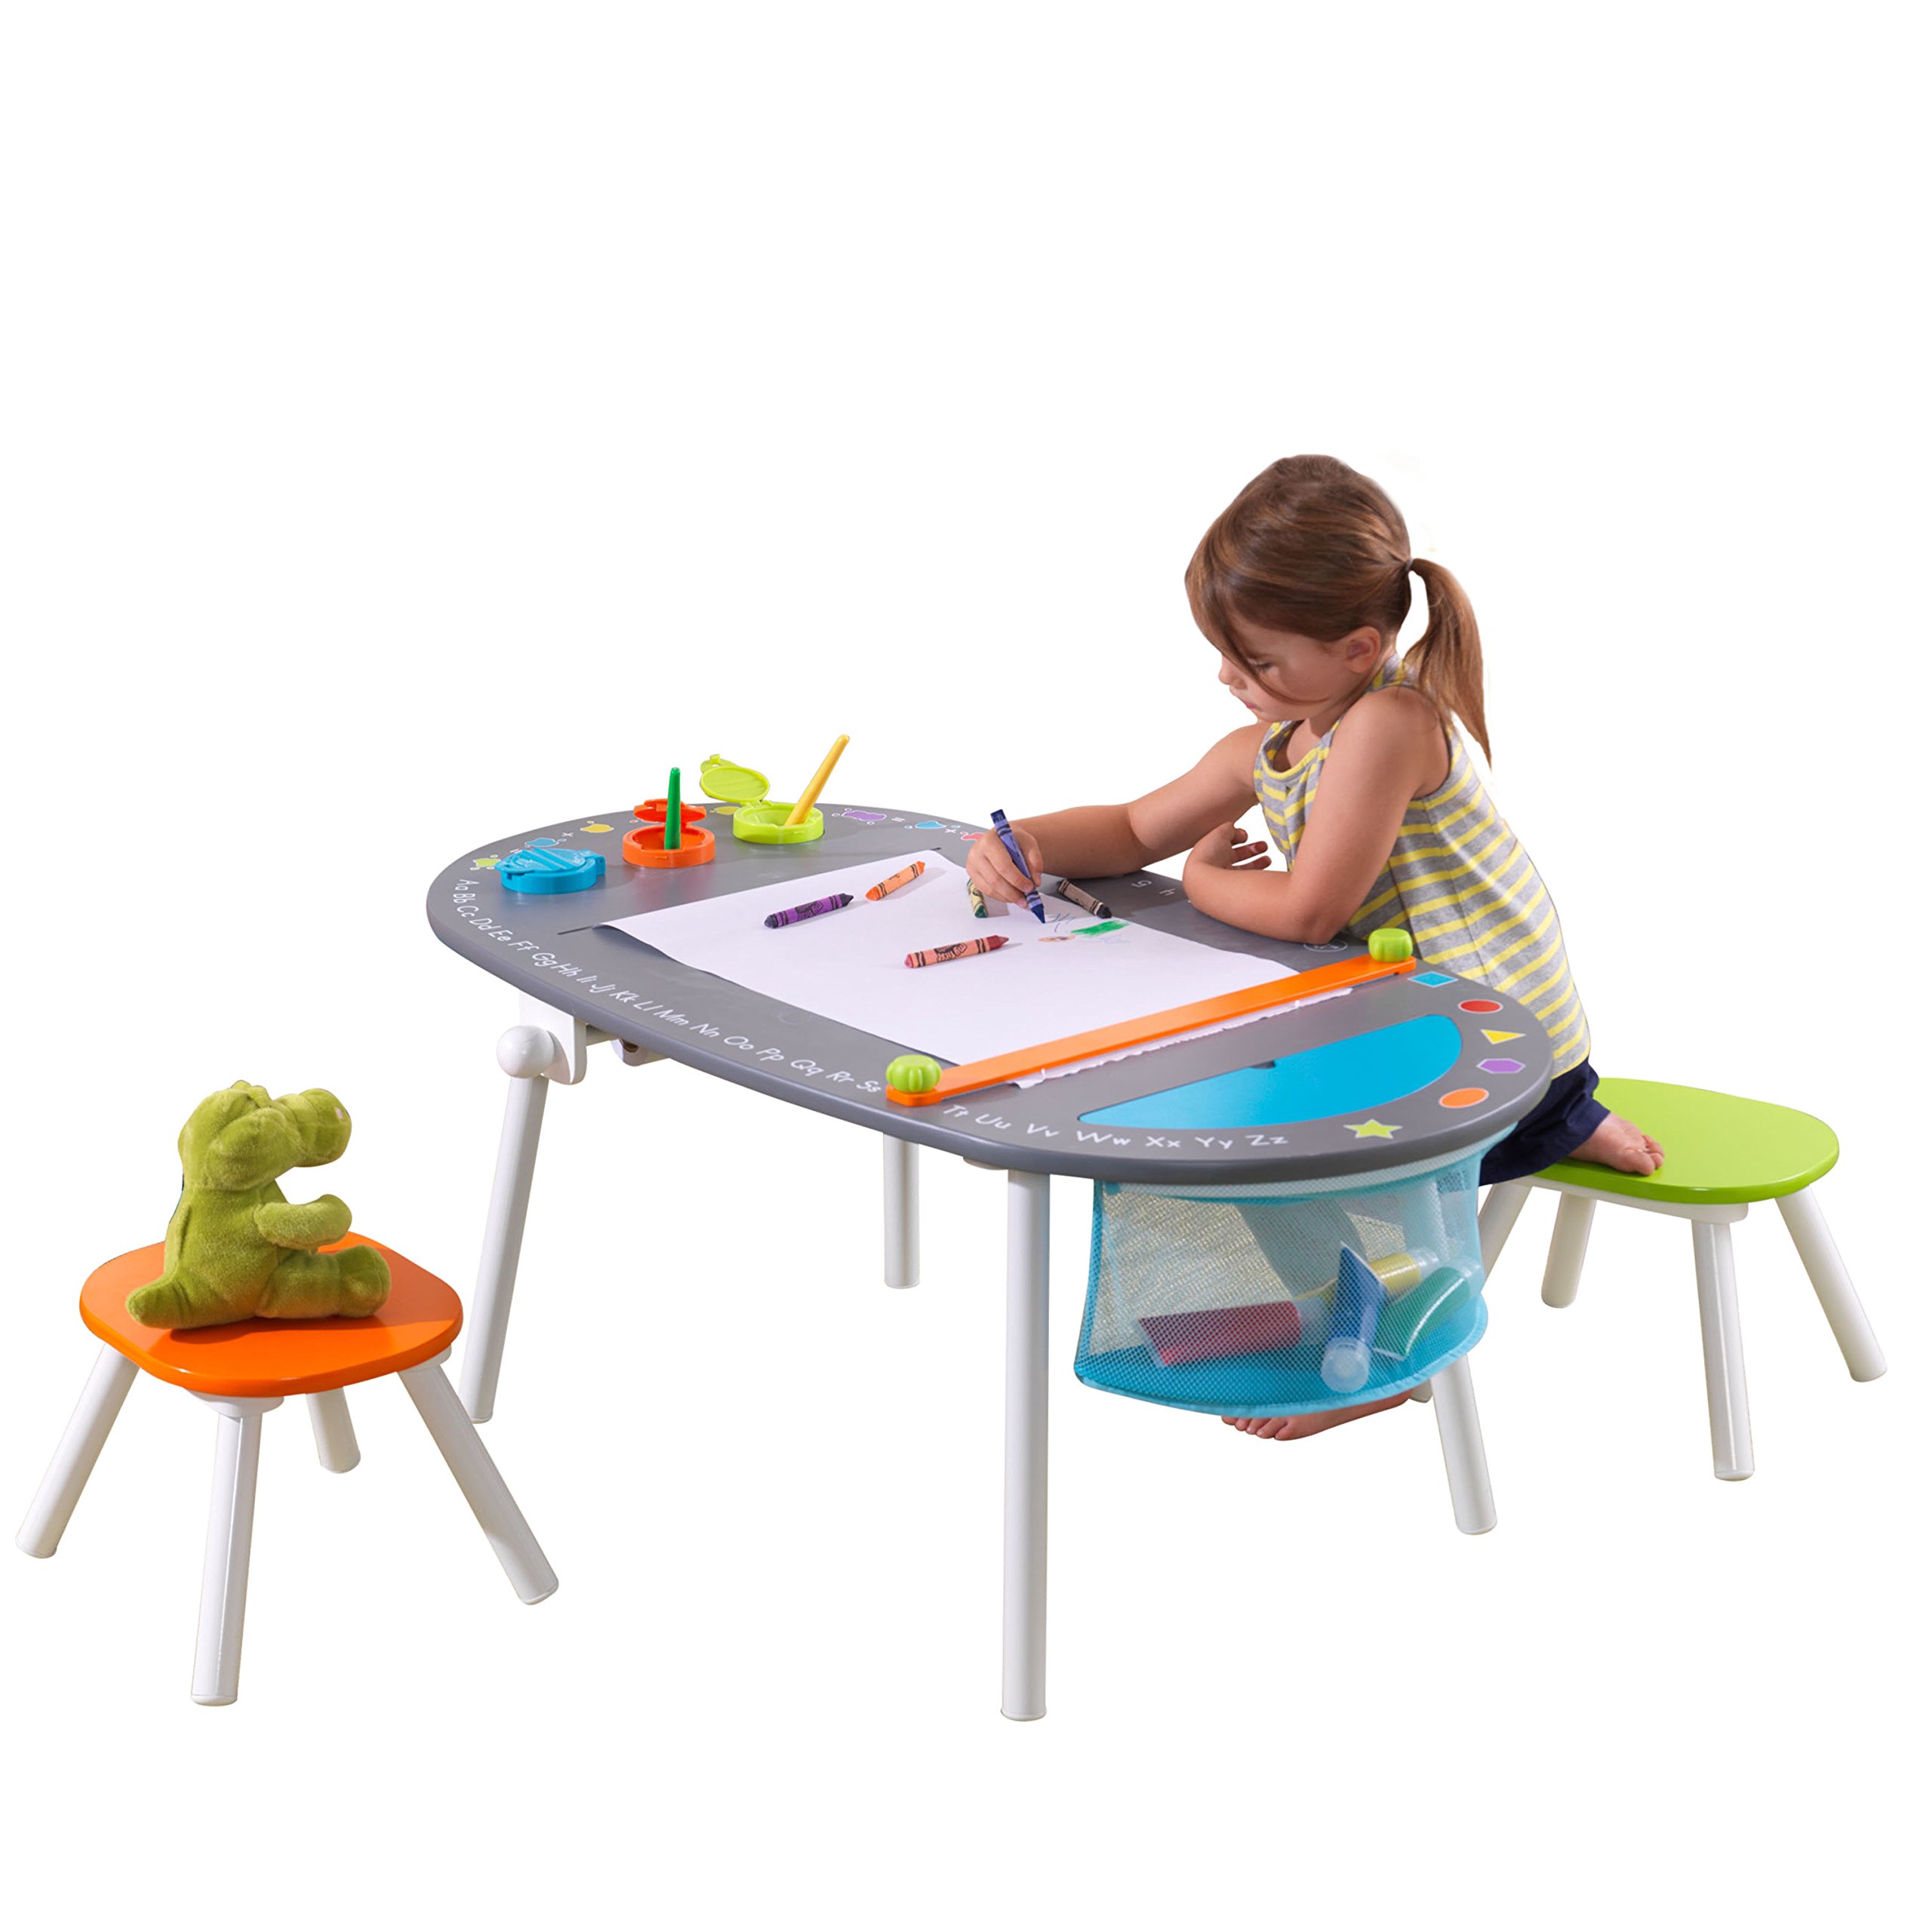 KidKraft Wooden Chalkboard Art Table with 2 Stools, and Paint Cups, Children's Furniture, Brightly Colored, Gift for Ages 3-8